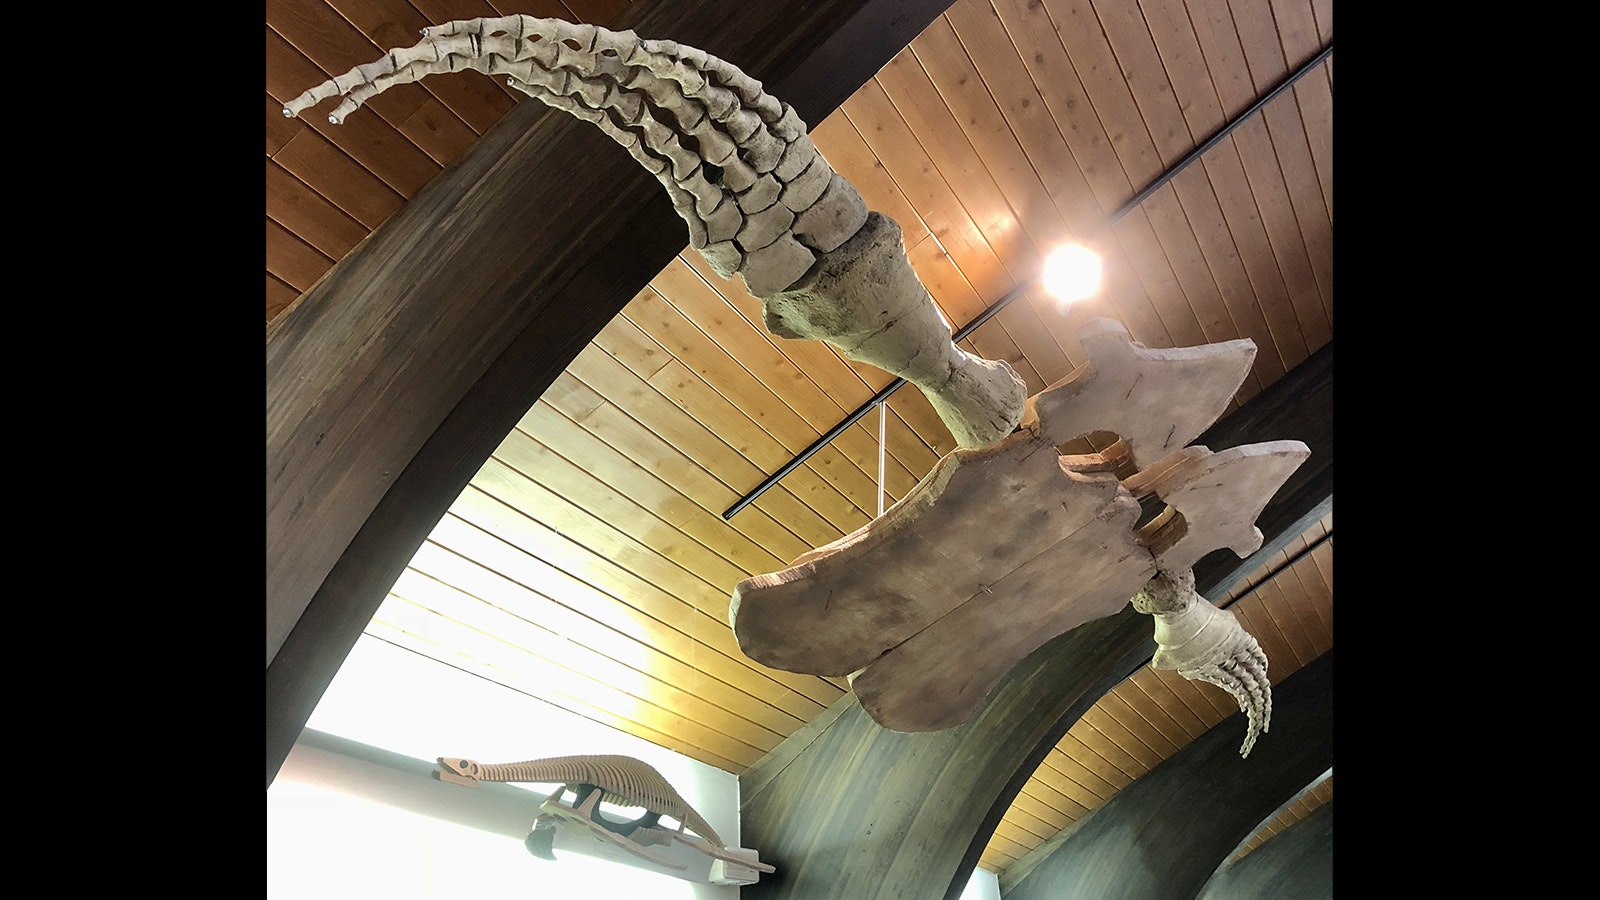 The front flippers of Megalneusaurus and a replica of a small Wyoming plesiosaur Tatenectes at the Tate Museum in Casper. Both of these plesiosaurs were found in the Sundance Formation, a time when Wyoming was covered with a warm shallow sea around 150 million years ago.